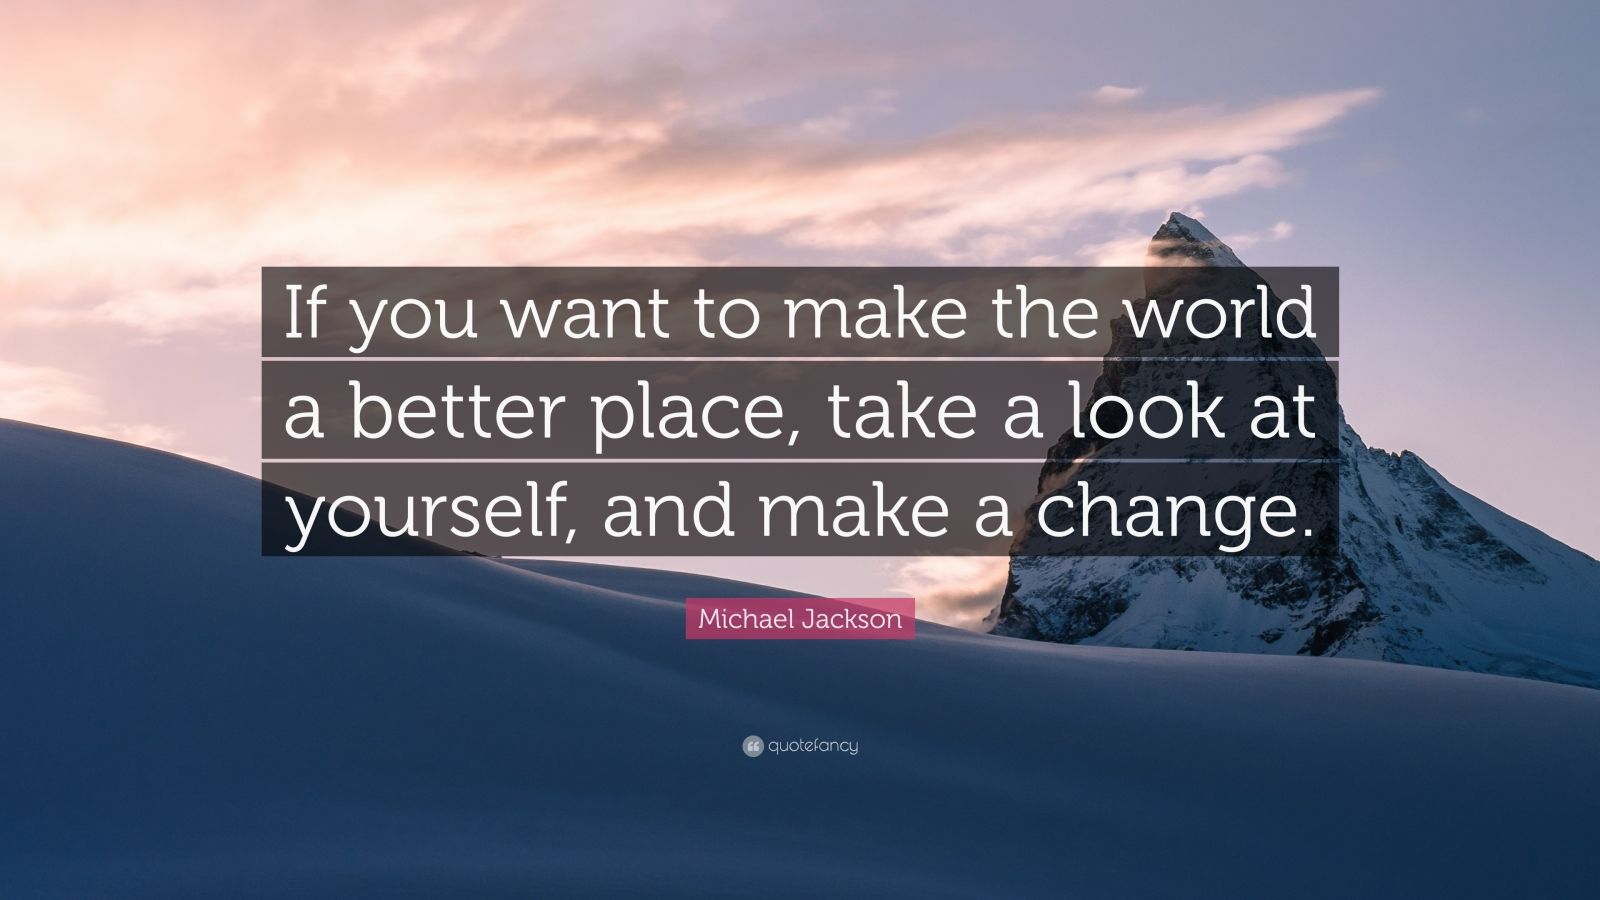 Michael Jackson Quote: “If you want to make the world a better place